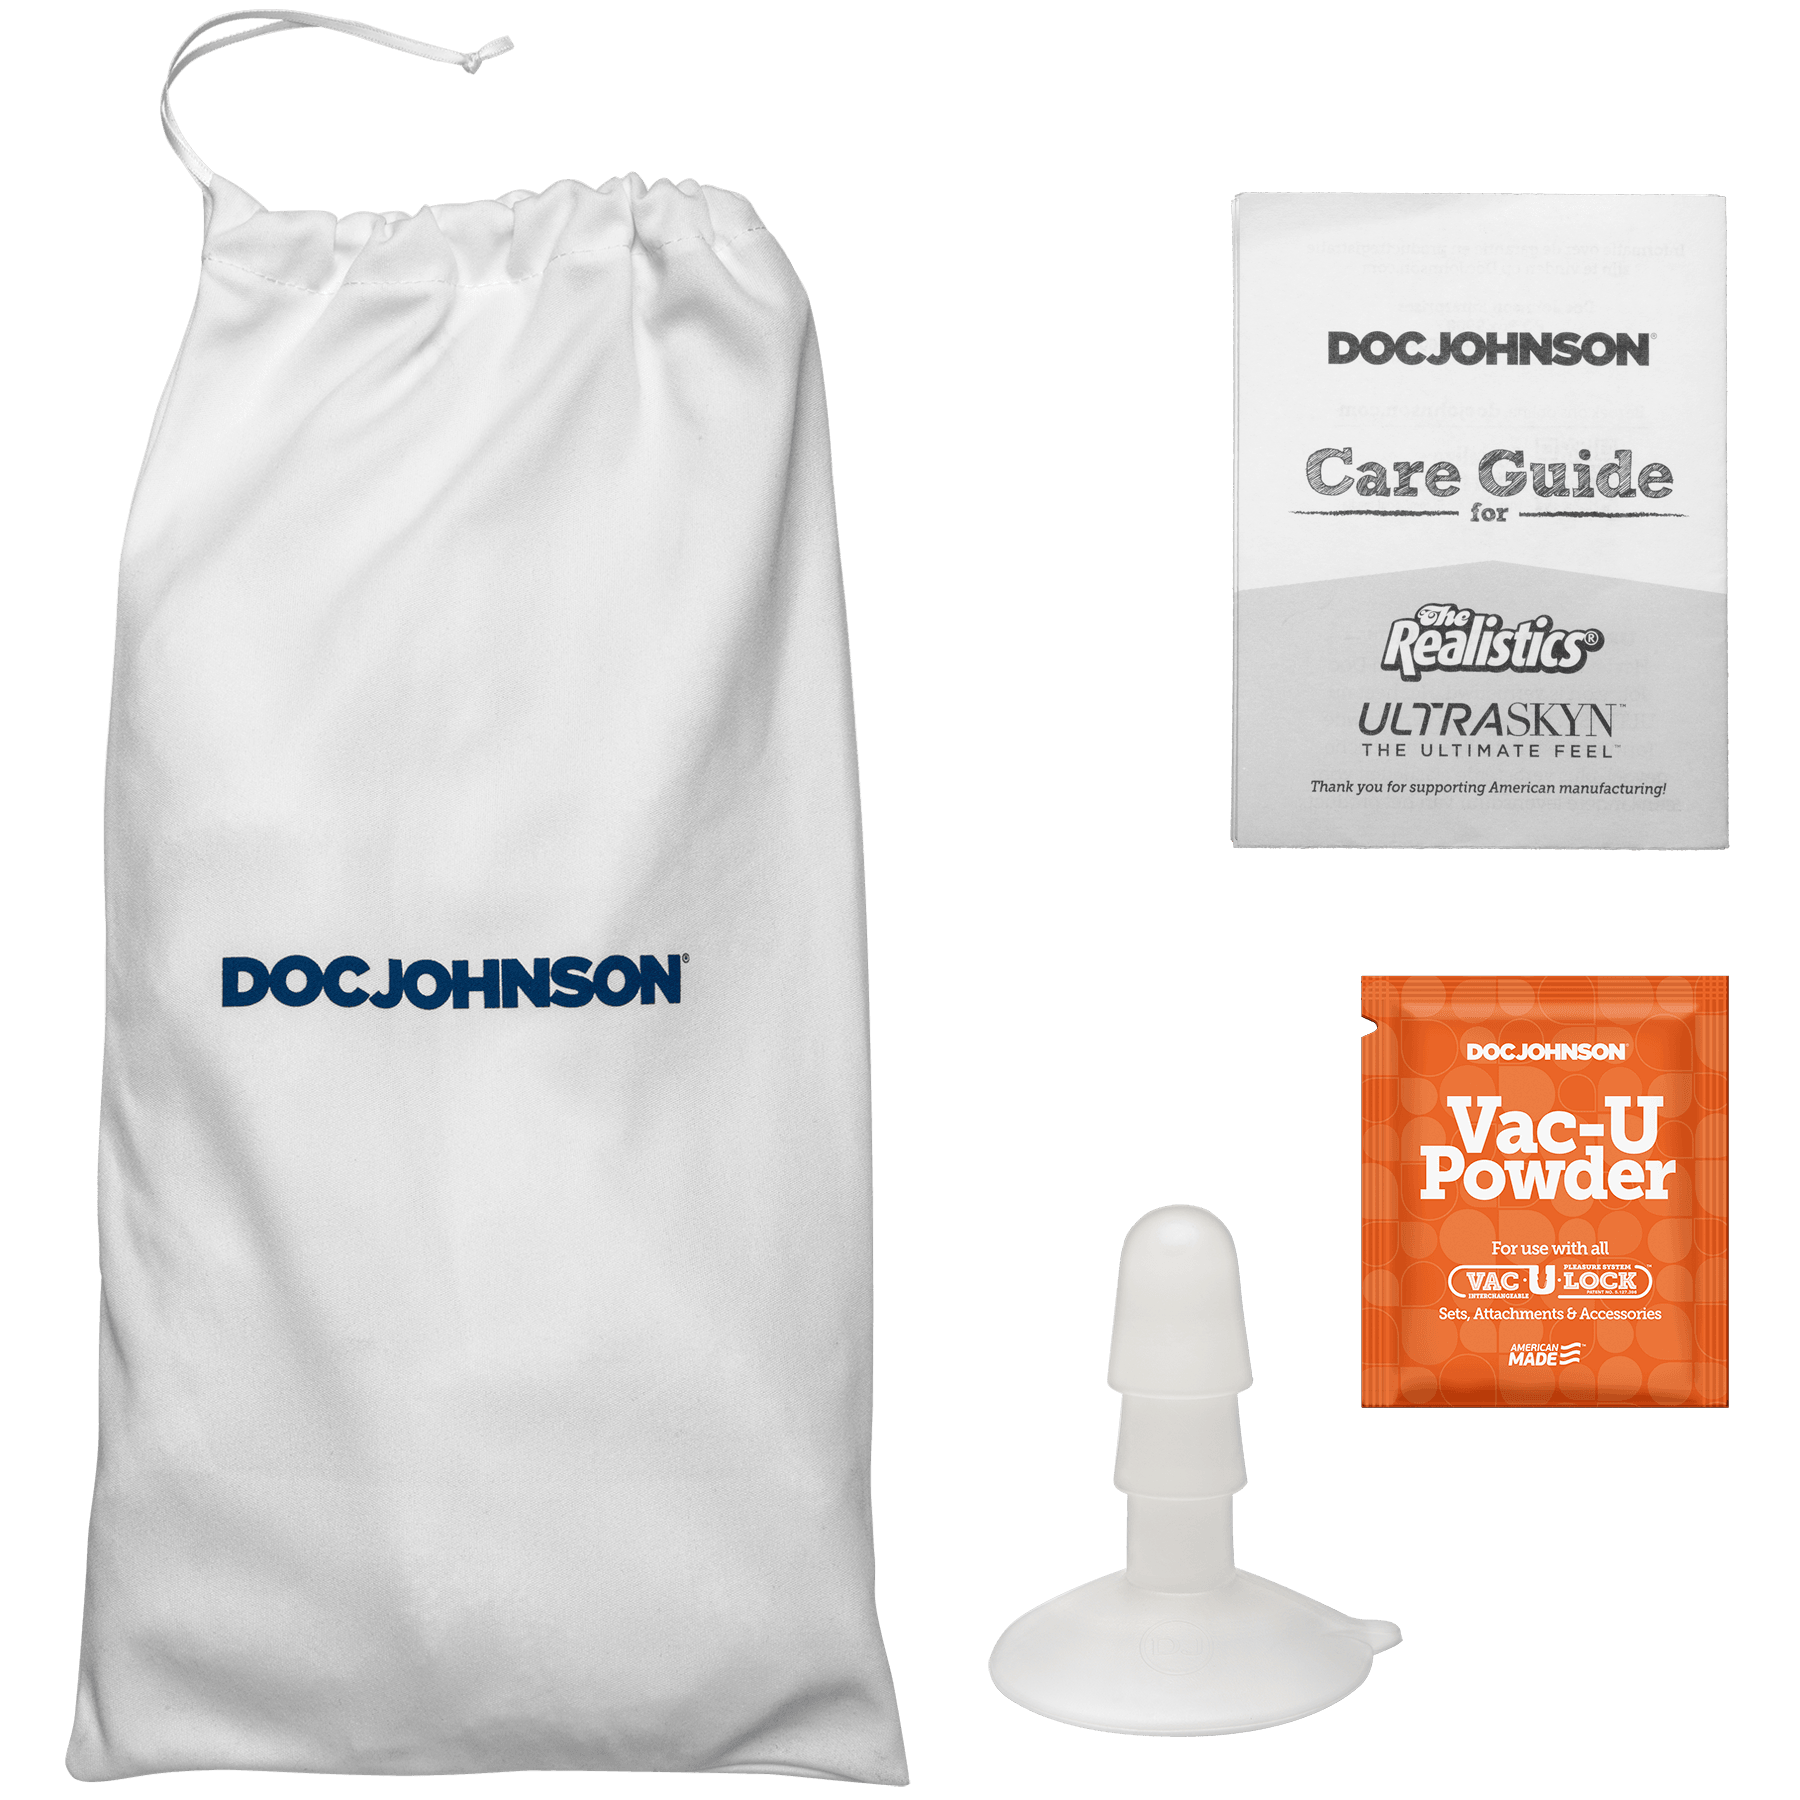 Doc Johnson Signature Cocks Brysen 7.5 Cock - Buy At Luxury Toy X - Free 3-Day Shipping